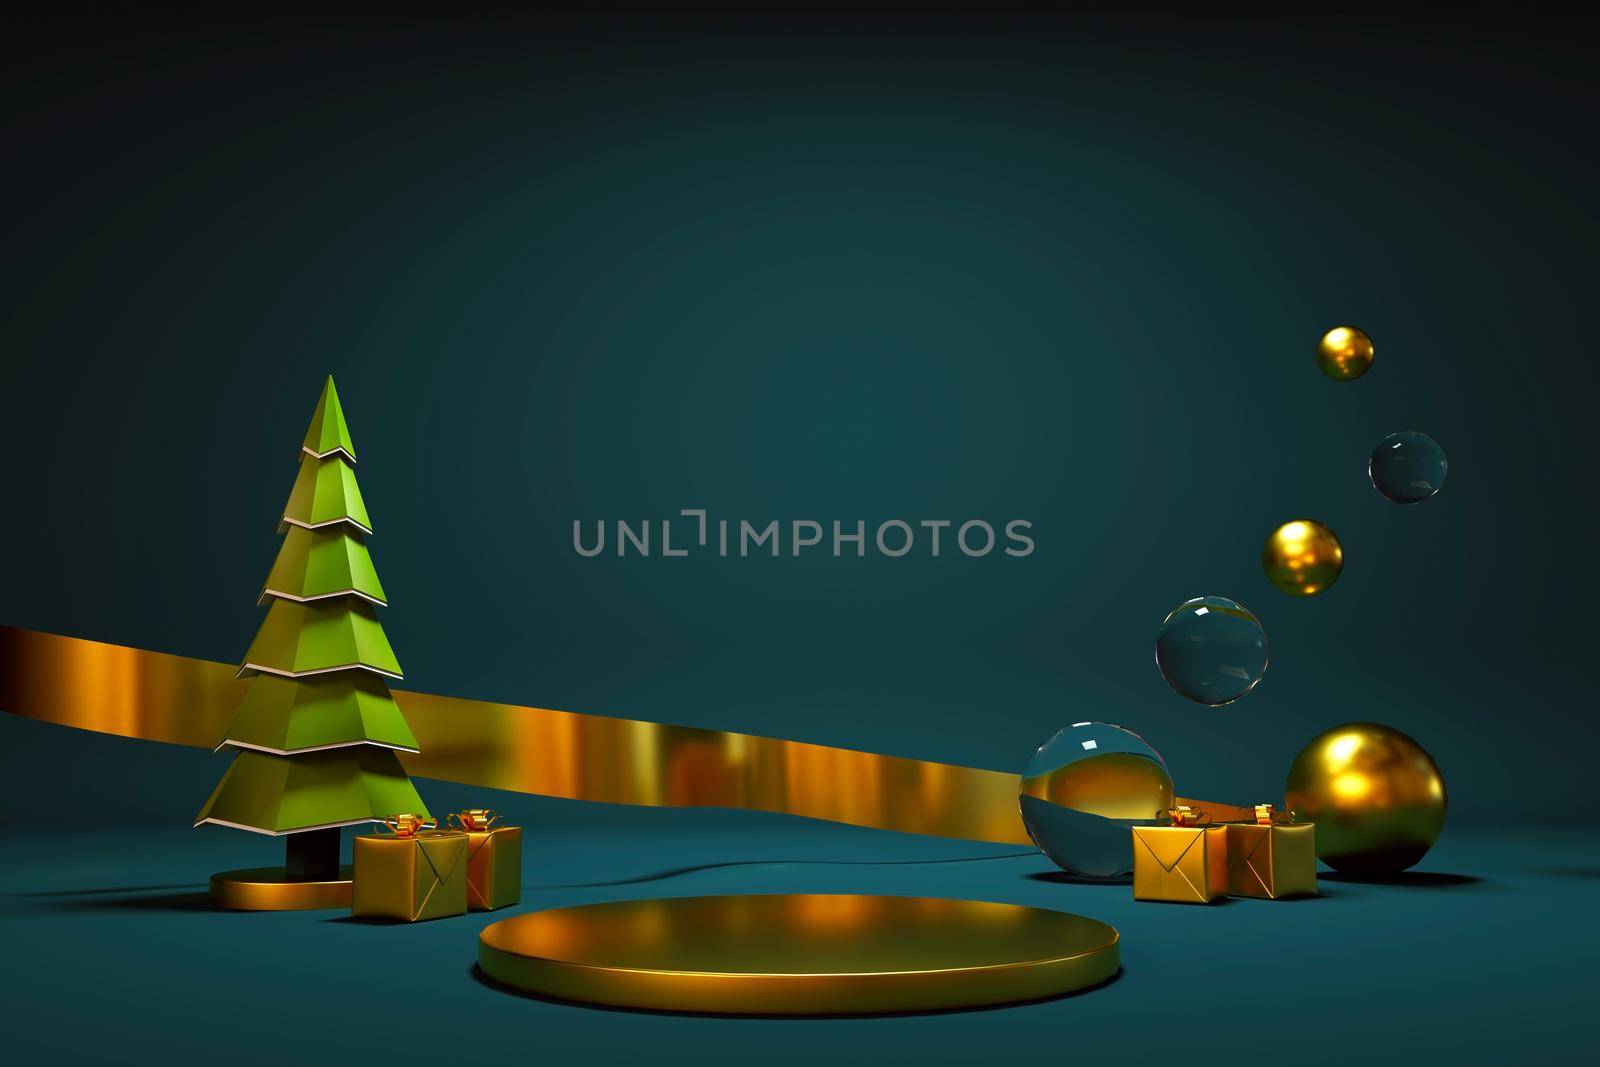 Realistic 3D illustration of a Christmas tree and decorations for the new year. Festive Christmas card. Gold ribbon, confetti, balloons and a Christmas tree on a dark isolated background. 3D graphics